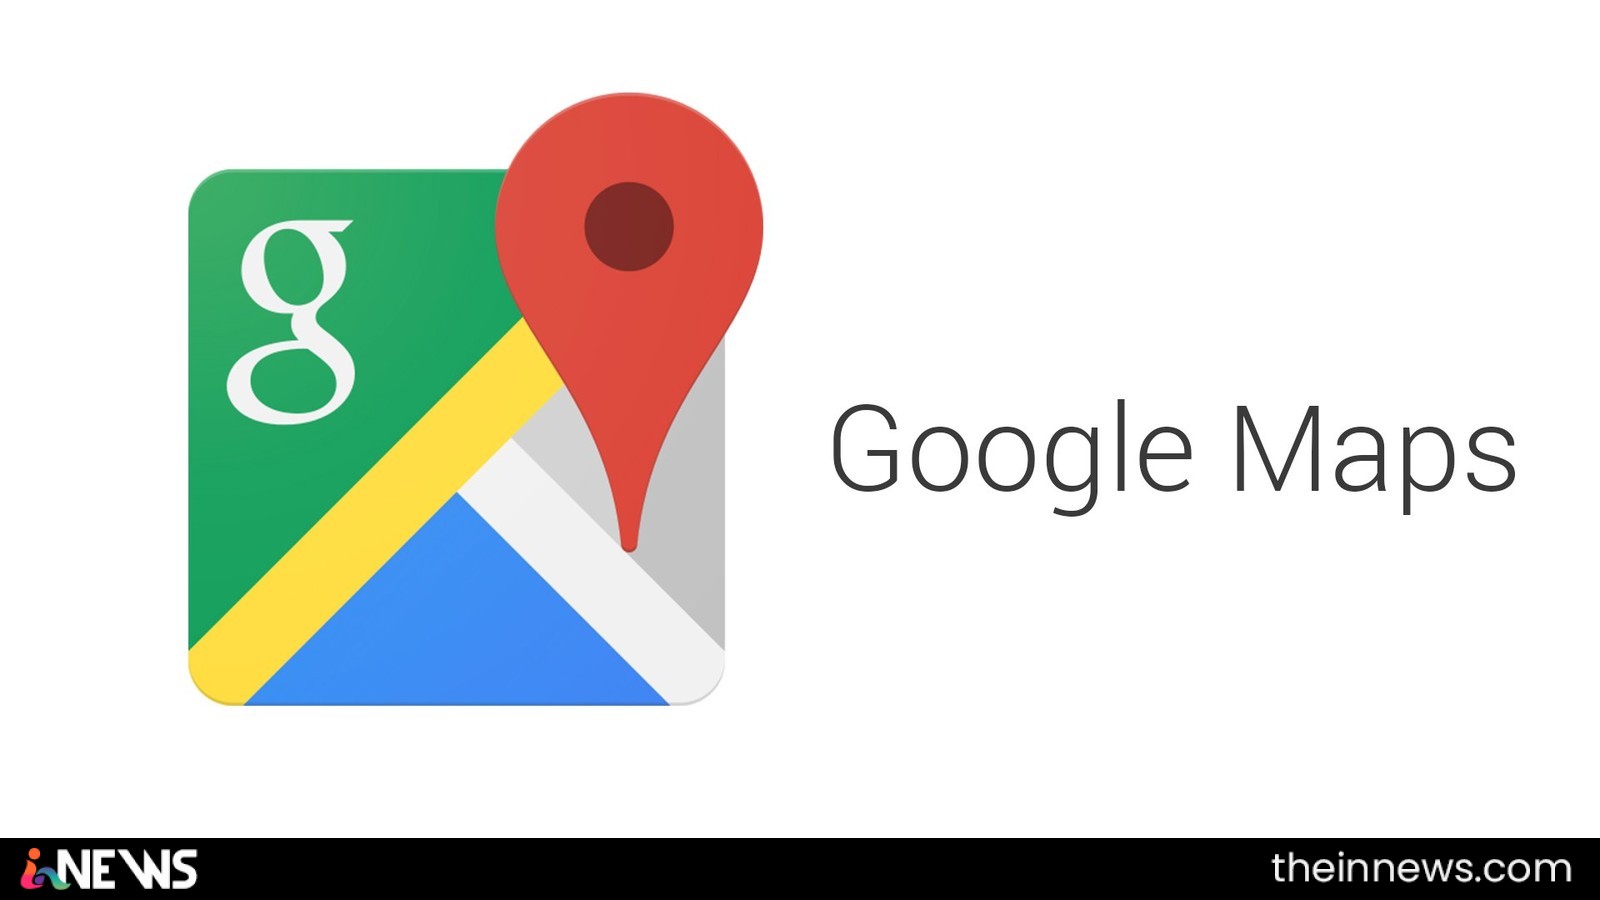 Google Maps for Android Now Lets You Report Accidents and Speed Traps Enroute